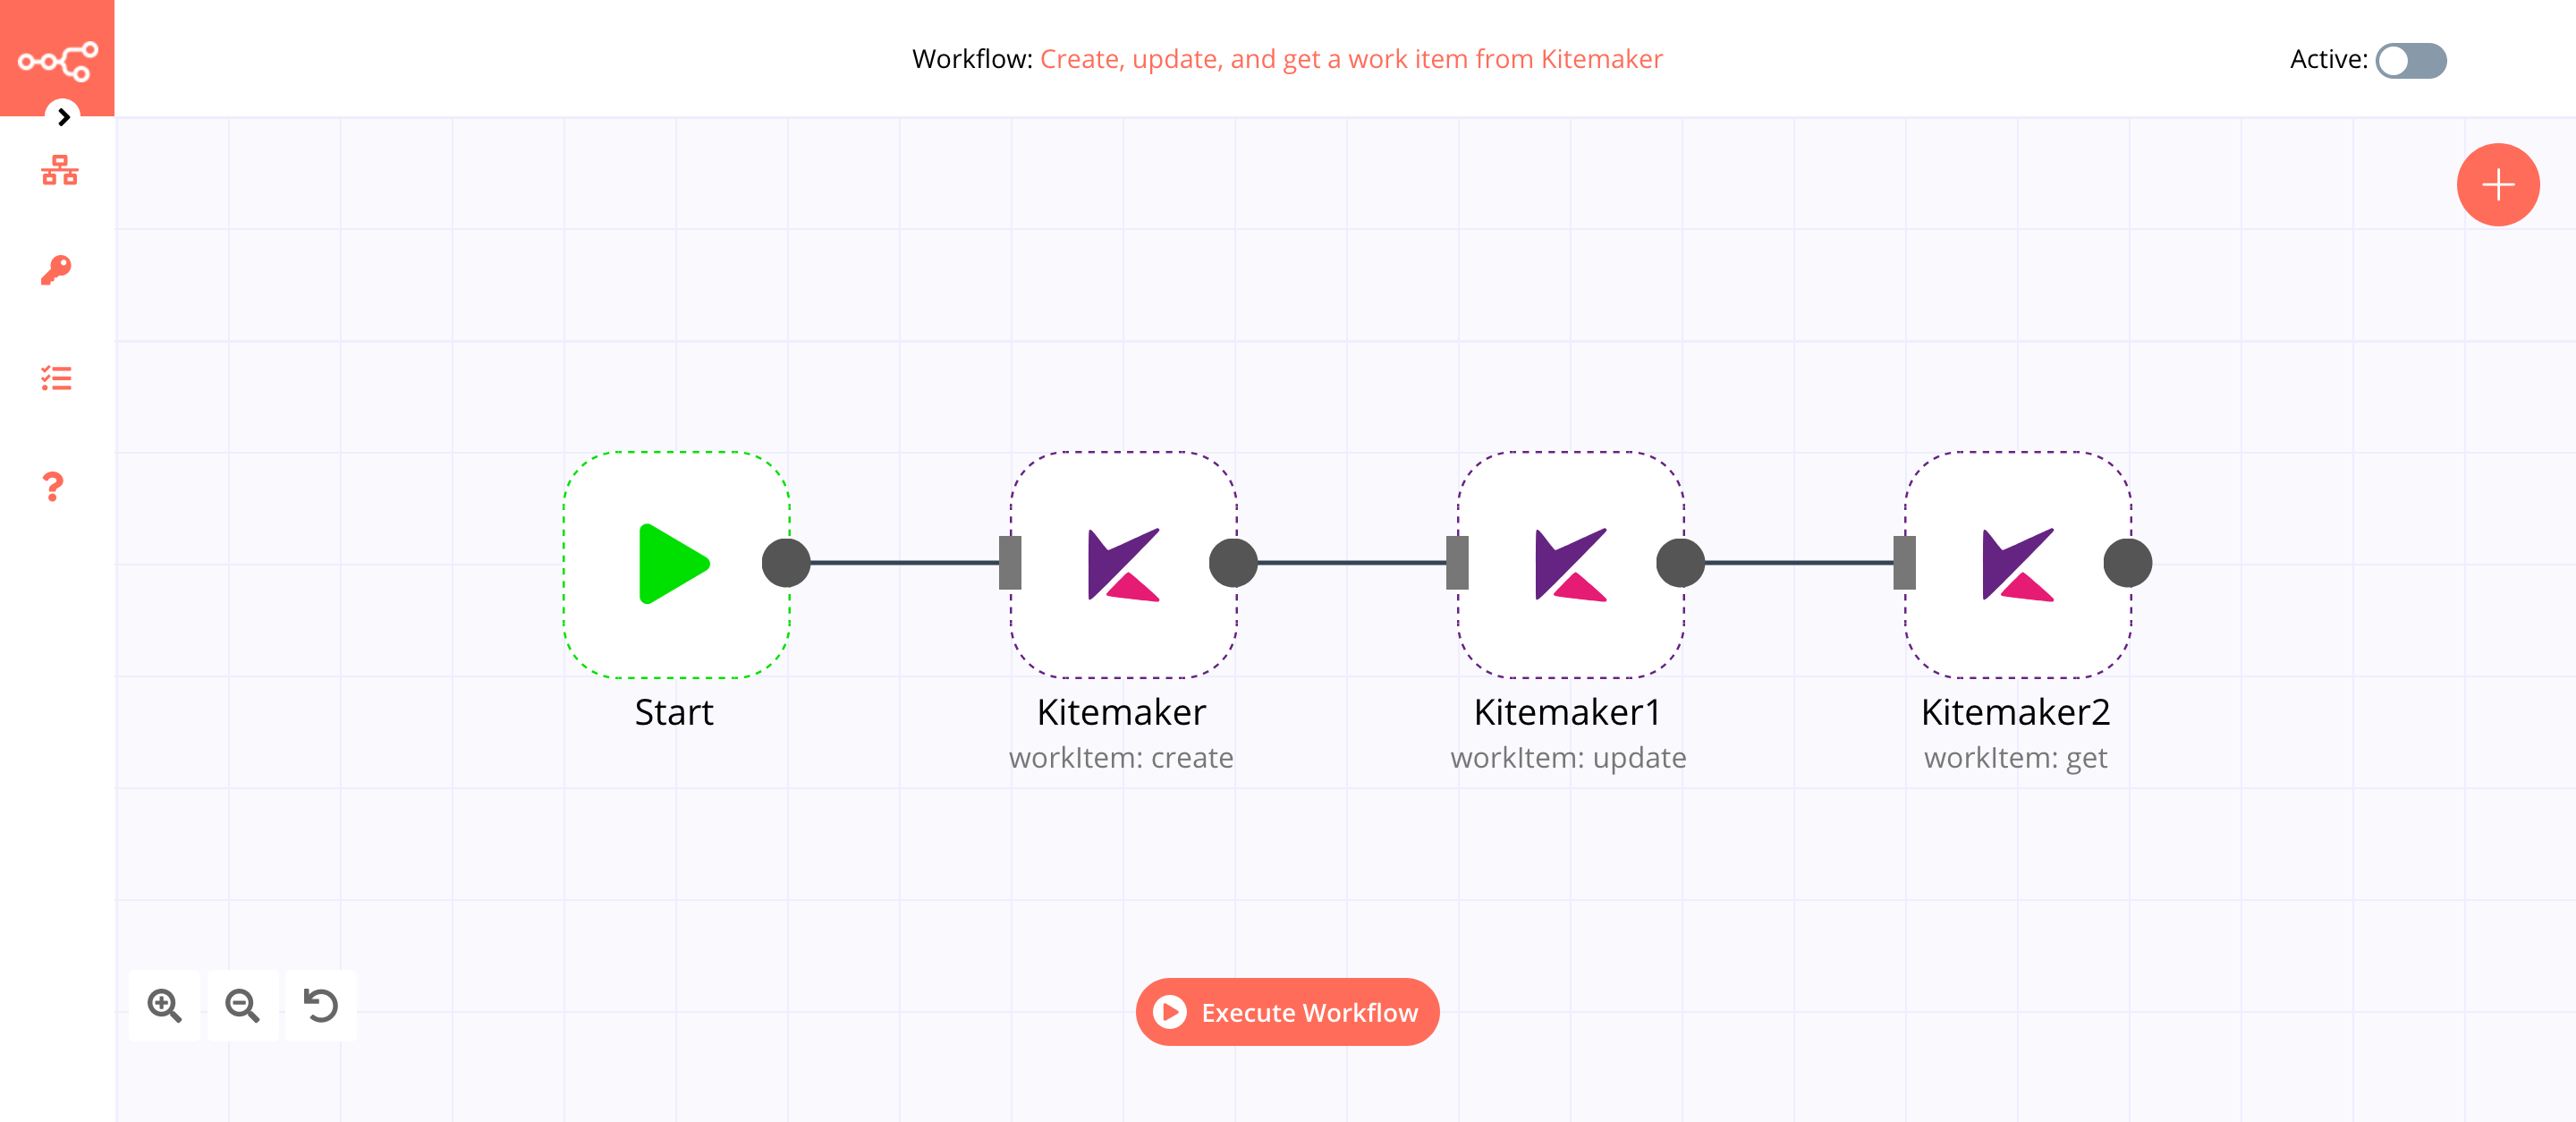 A workflow with the Kitemaker node